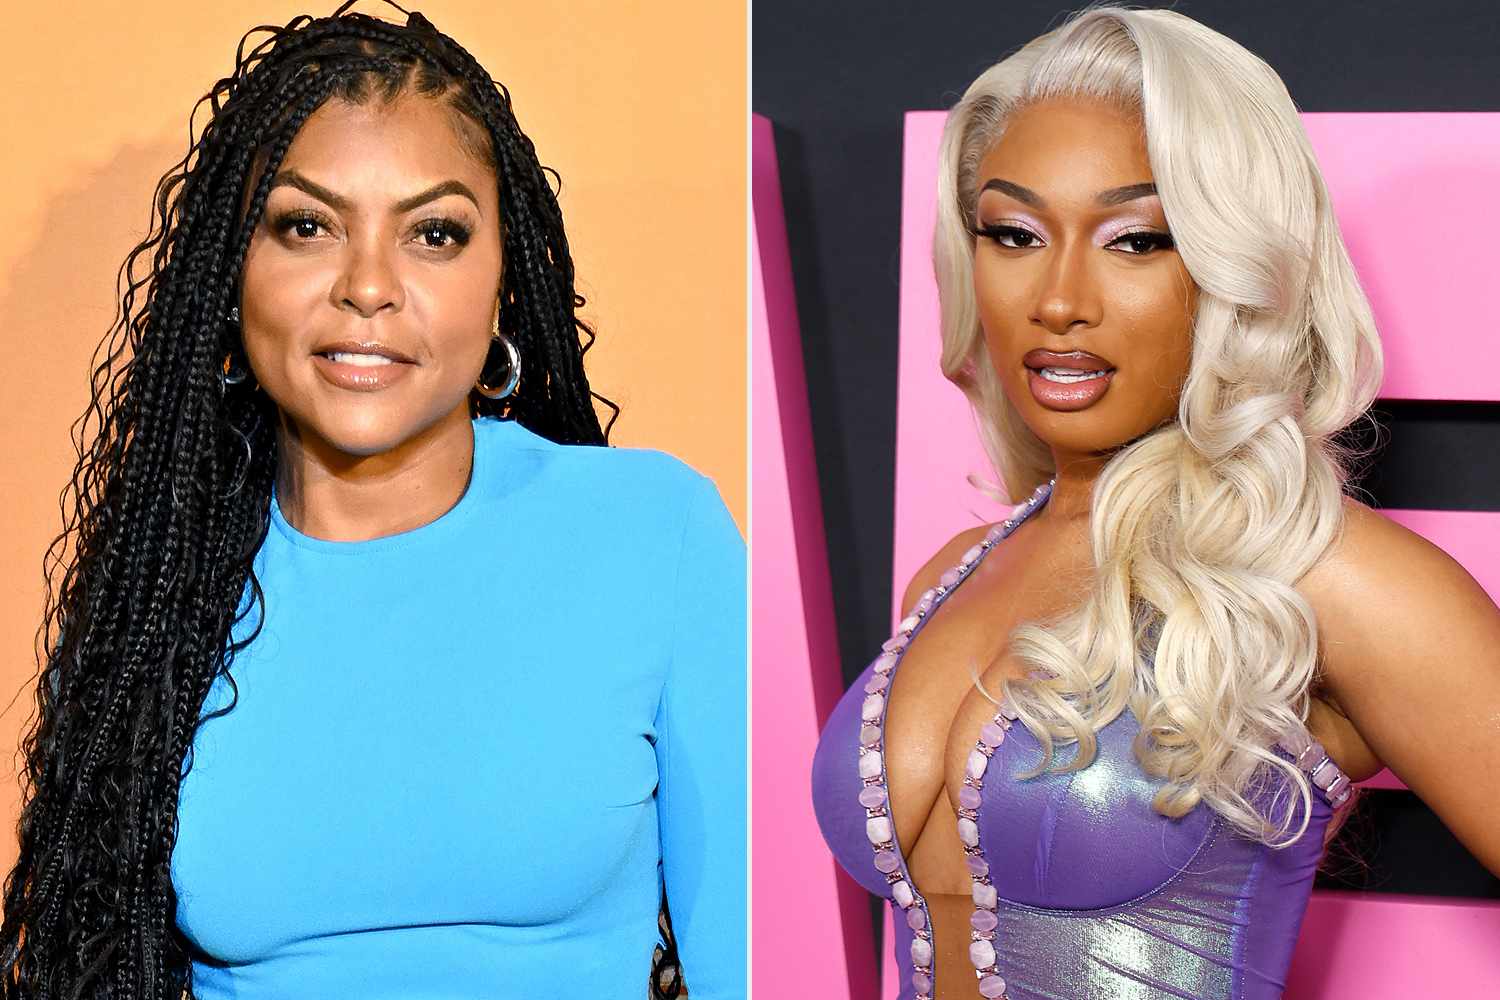 Taraji P. Henson Praises Megan Thee Stallion for Withstanding 'All of the Adversity': 'Proud of You' (Exclusive)